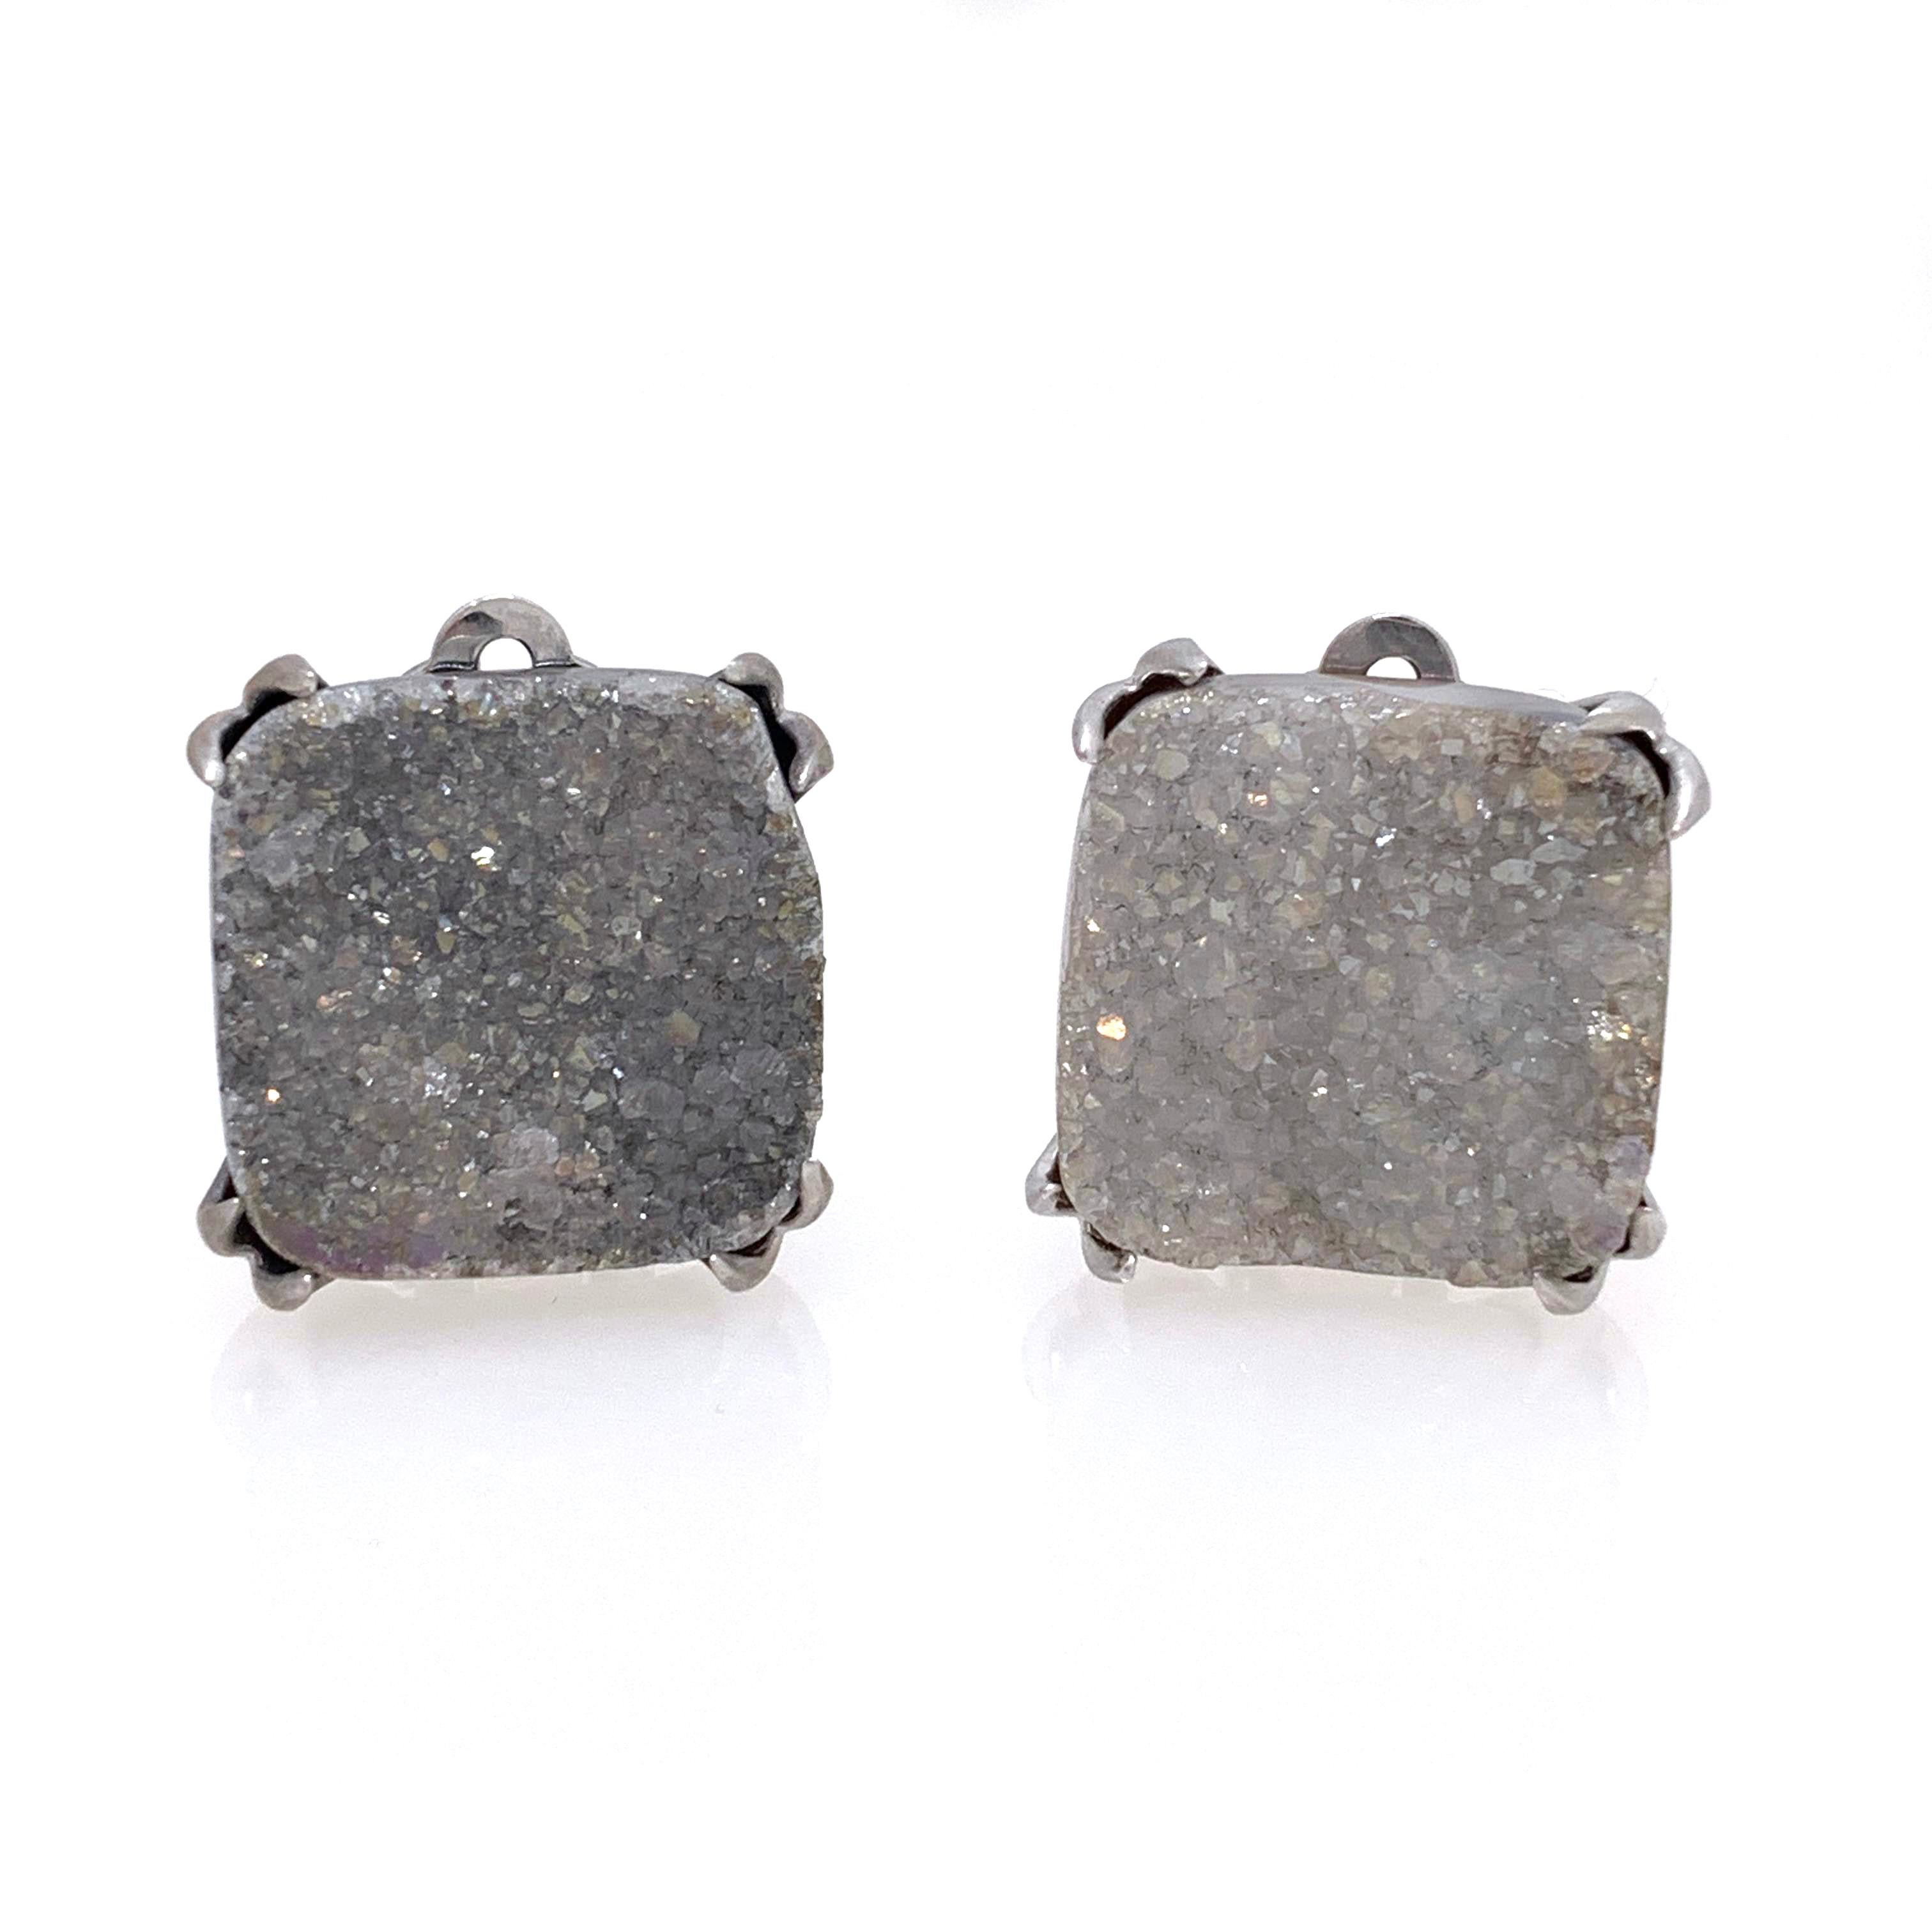 Fabulous pair of square shape druzy quartz clip on earrings. The pair measures 20mm width and height, in platinum rhodium plated sterling silver setting (matte finish). Large and comfortable clip back allowing the earrings to sit well on the